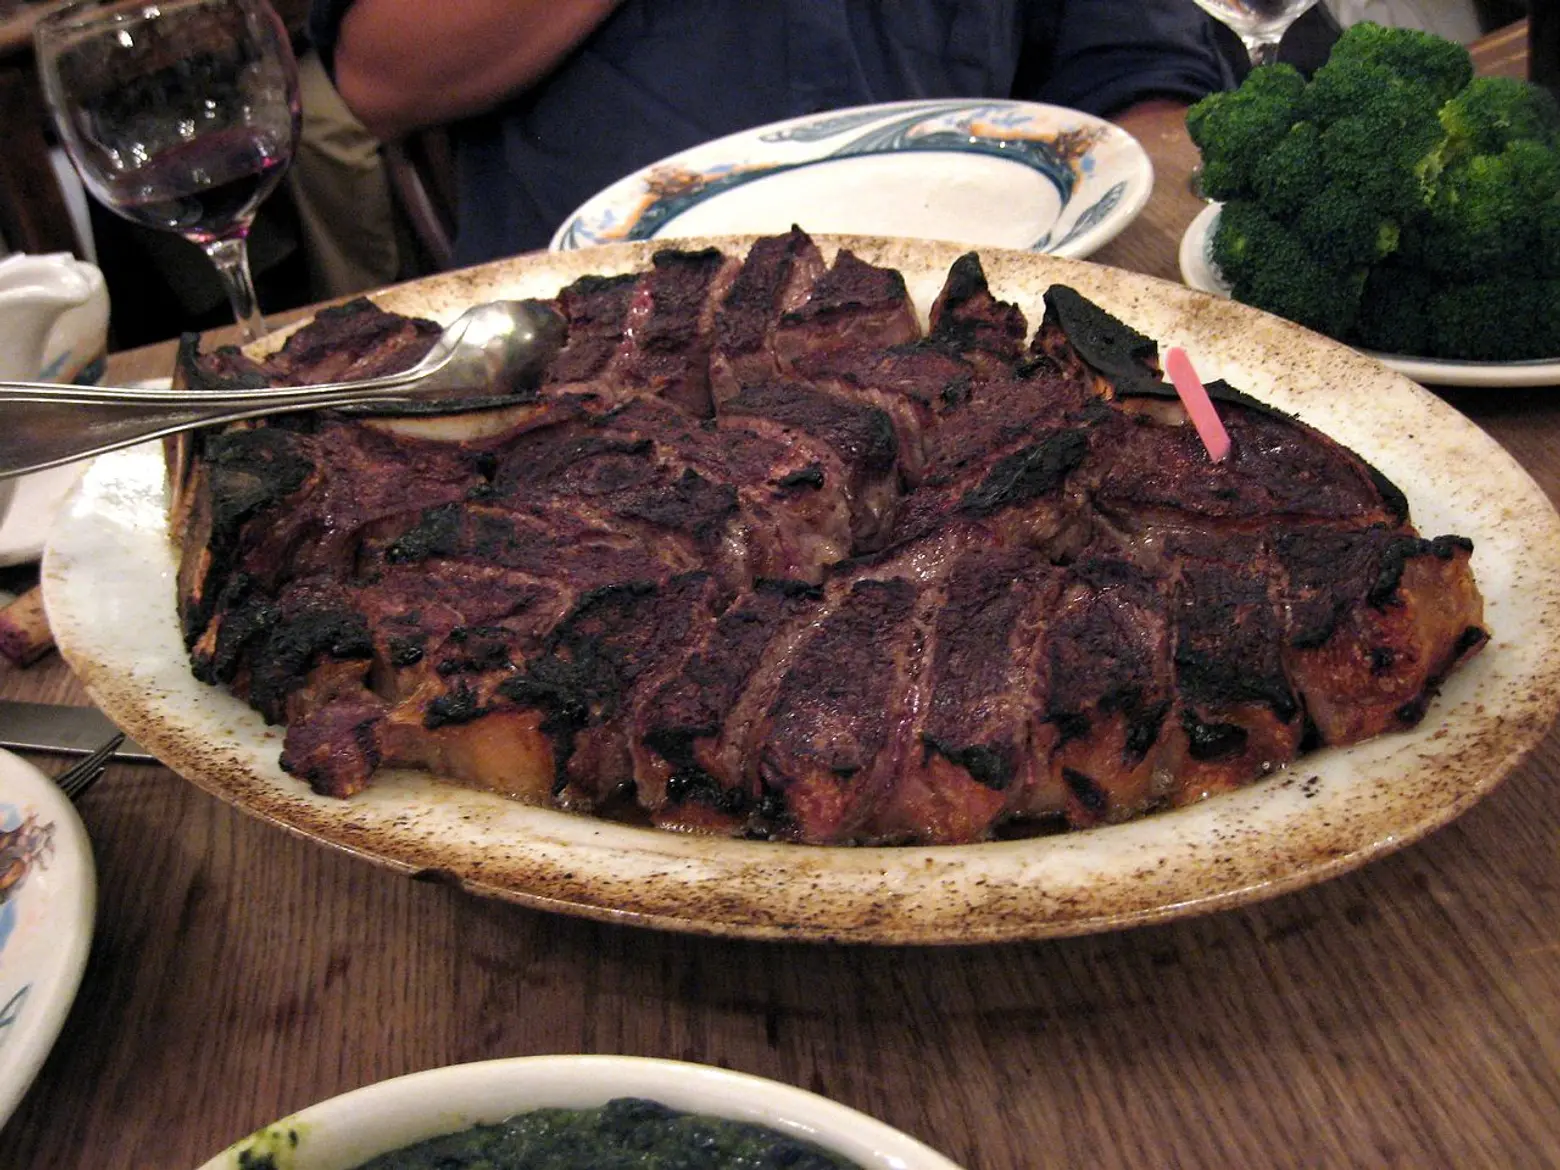 Peter Luger is now delivering its famous dry-aged steaks